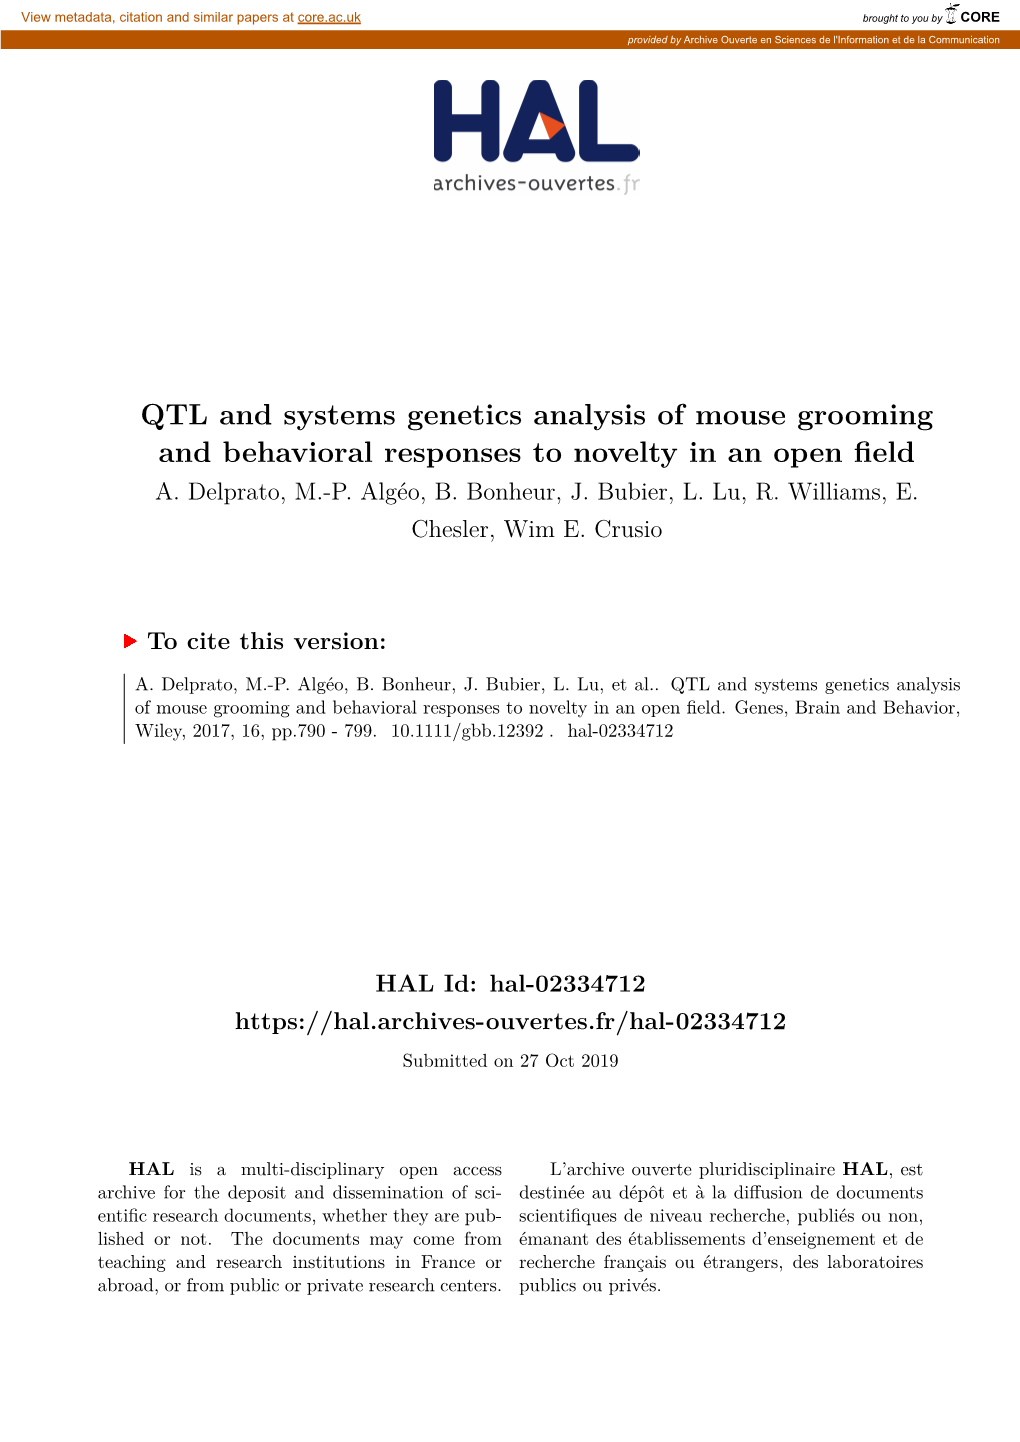 QTL and Systems Genetics Analysis of Mouse Grooming and Behavioral Responses to Novelty in an Open Field A